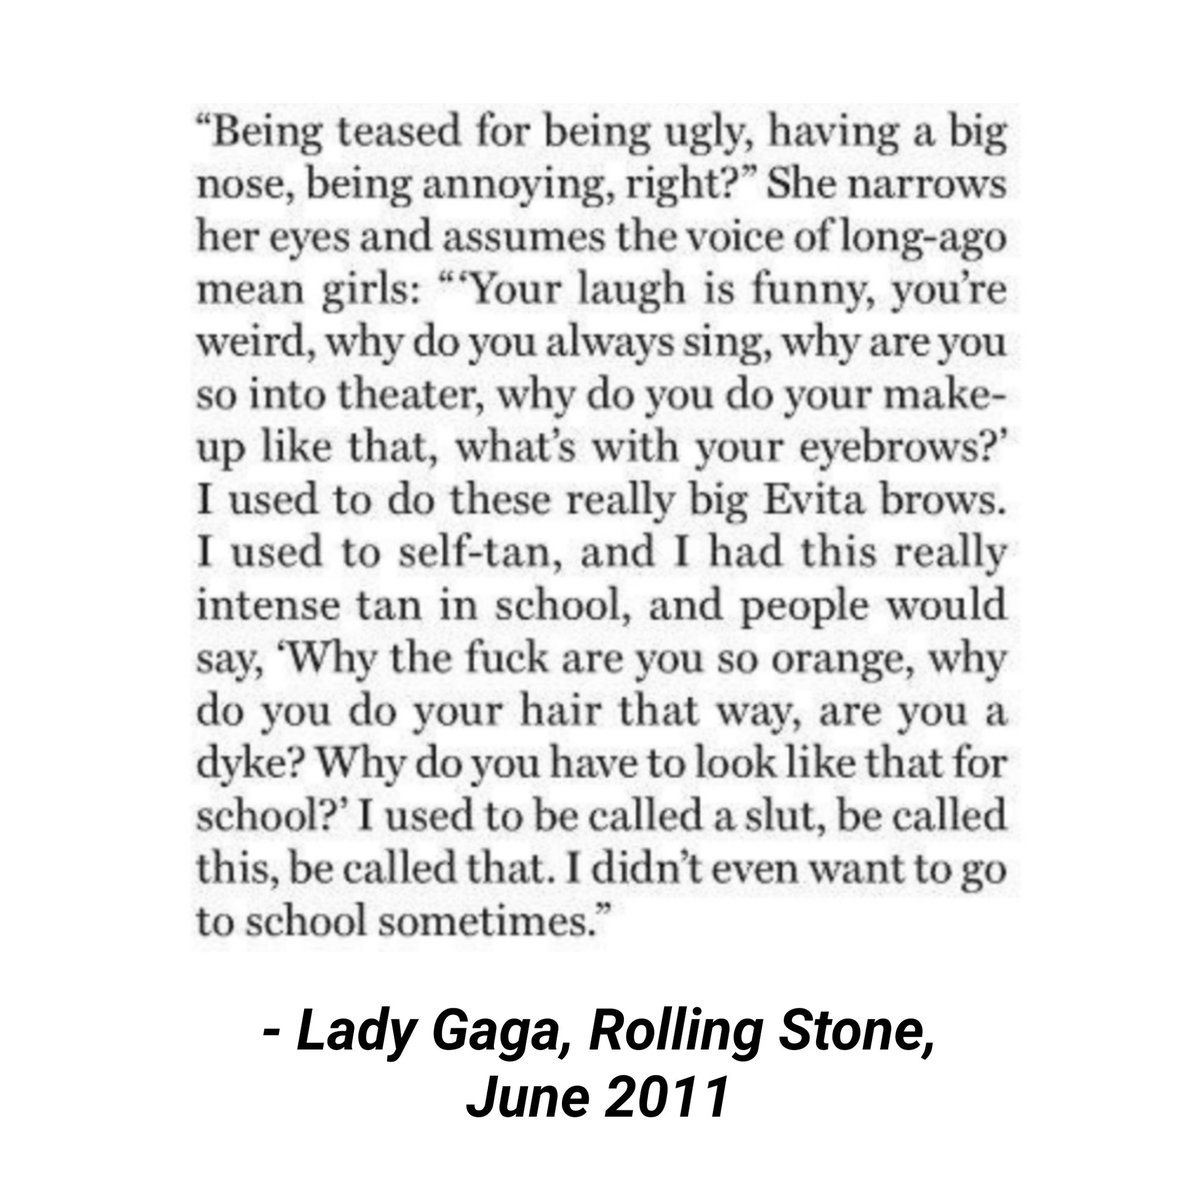 in school• gaga has reported being called the d slur by her classmates numerous times, leading to the assumption that she was presumed a lesbian by her classmates• we don't know if gaga herself was aware of her attraction to women at this pointthis is also lesbophobic.